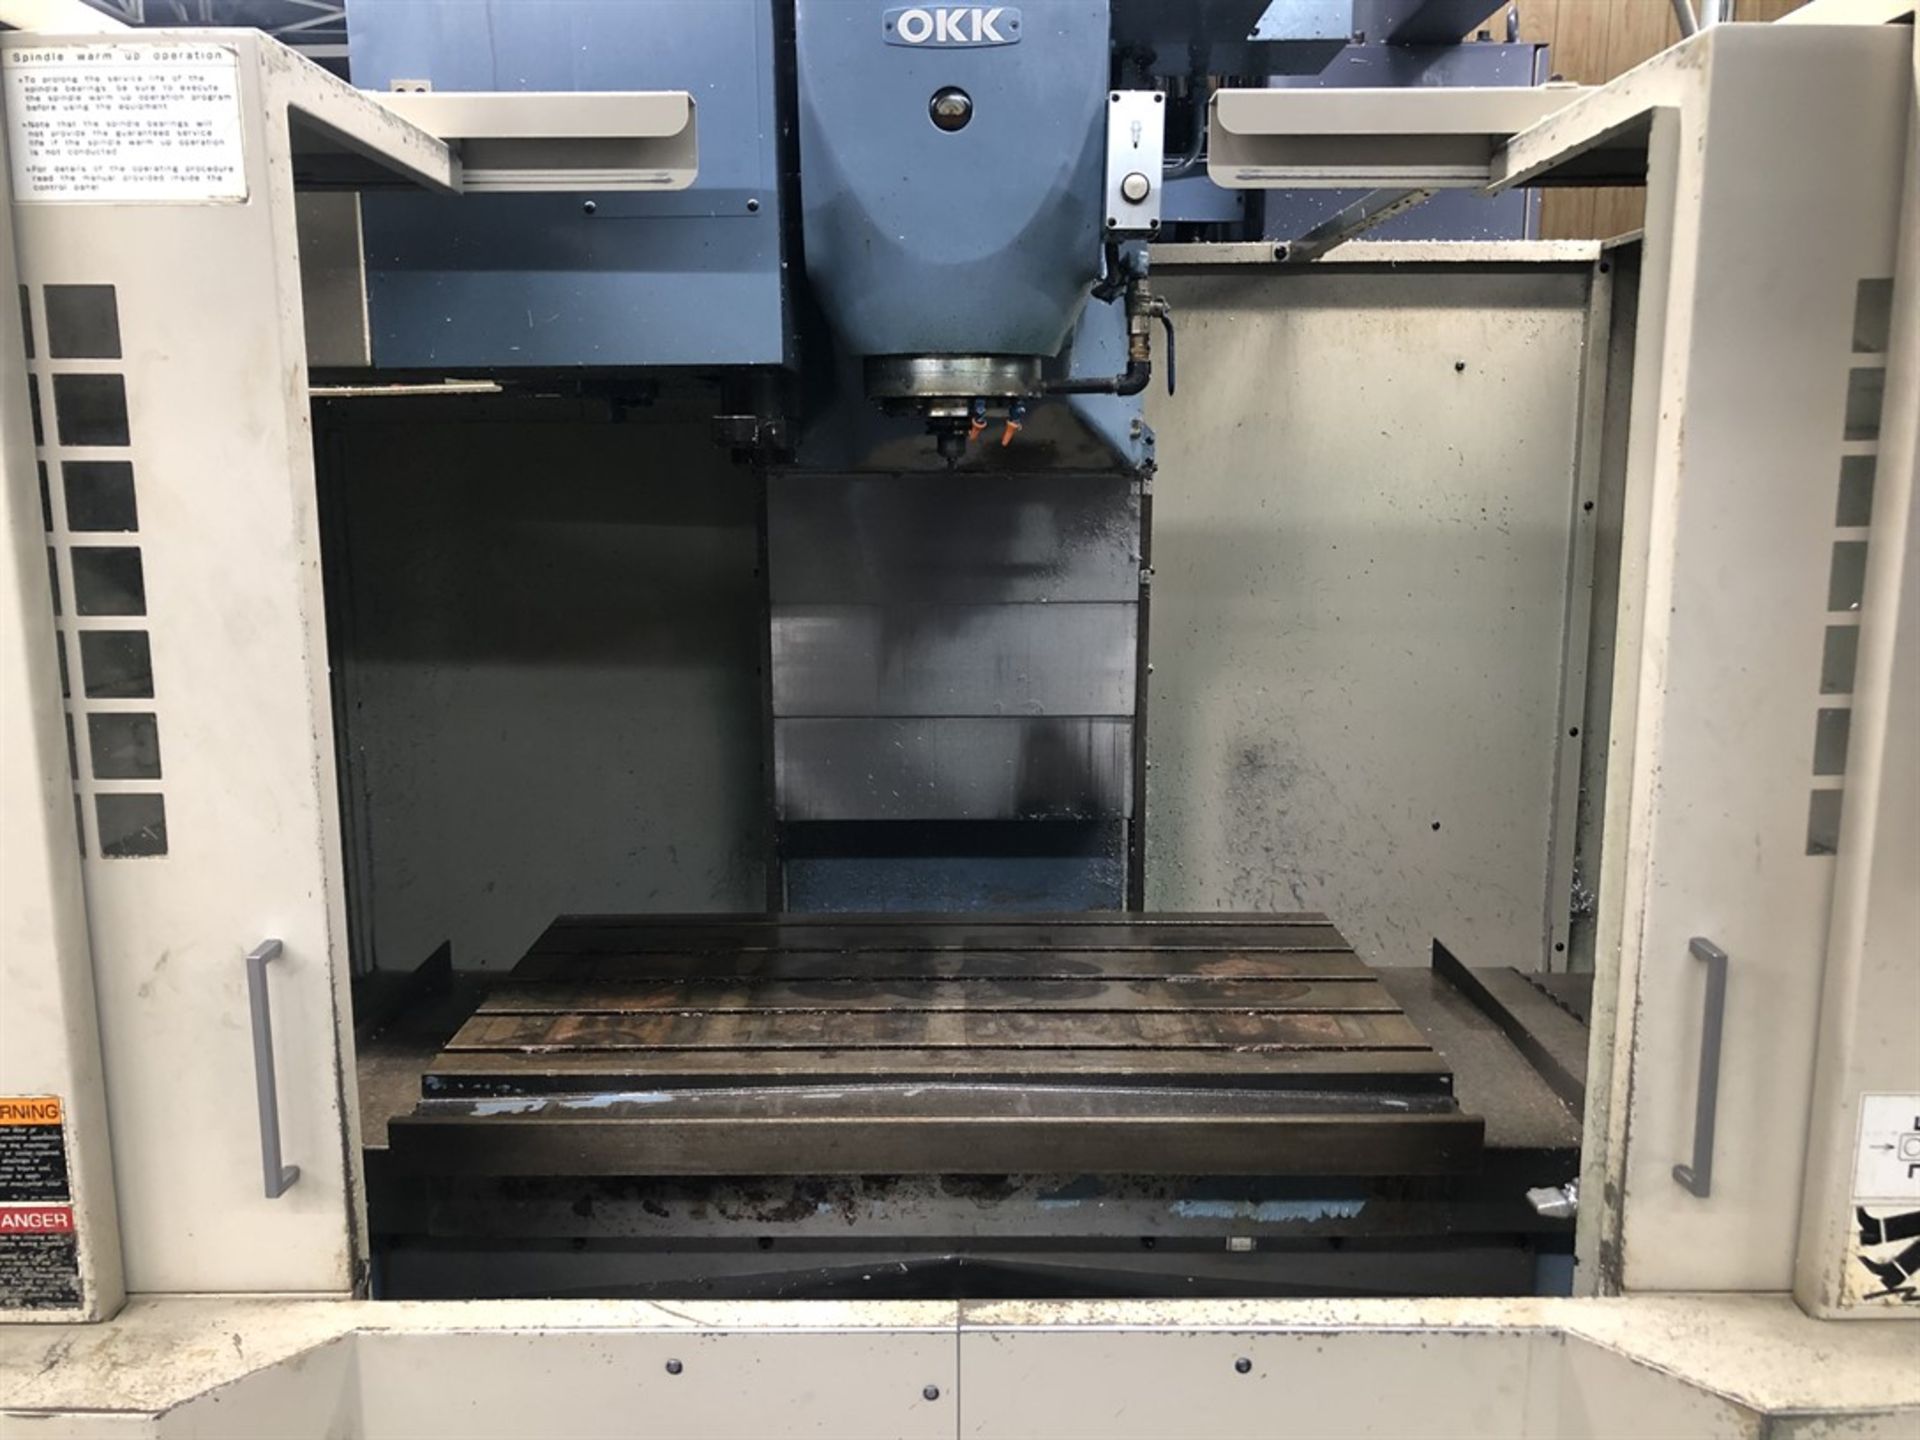 OKK VM5II Vertical Machining Center, s/n, 434, Neomatic 635 Control, 22” x 41” Table, CT40 Spindle - Image 6 of 11